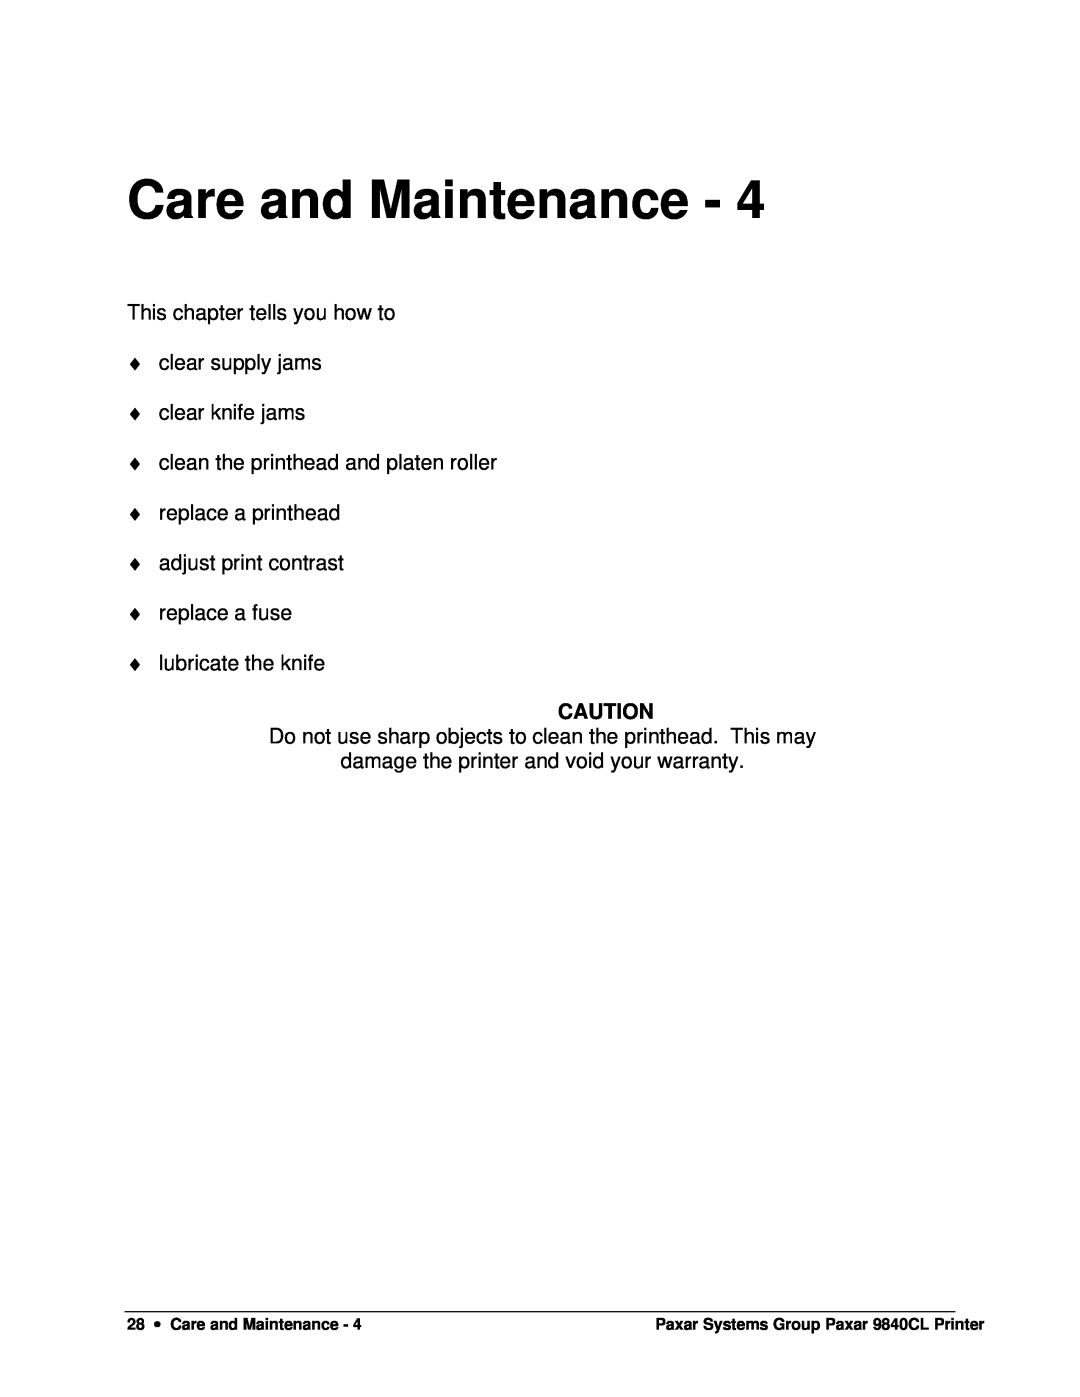 Paxar 9840CL user manual Care and Maintenance, This chapter tells you how to clear supply jams clear knife jams 